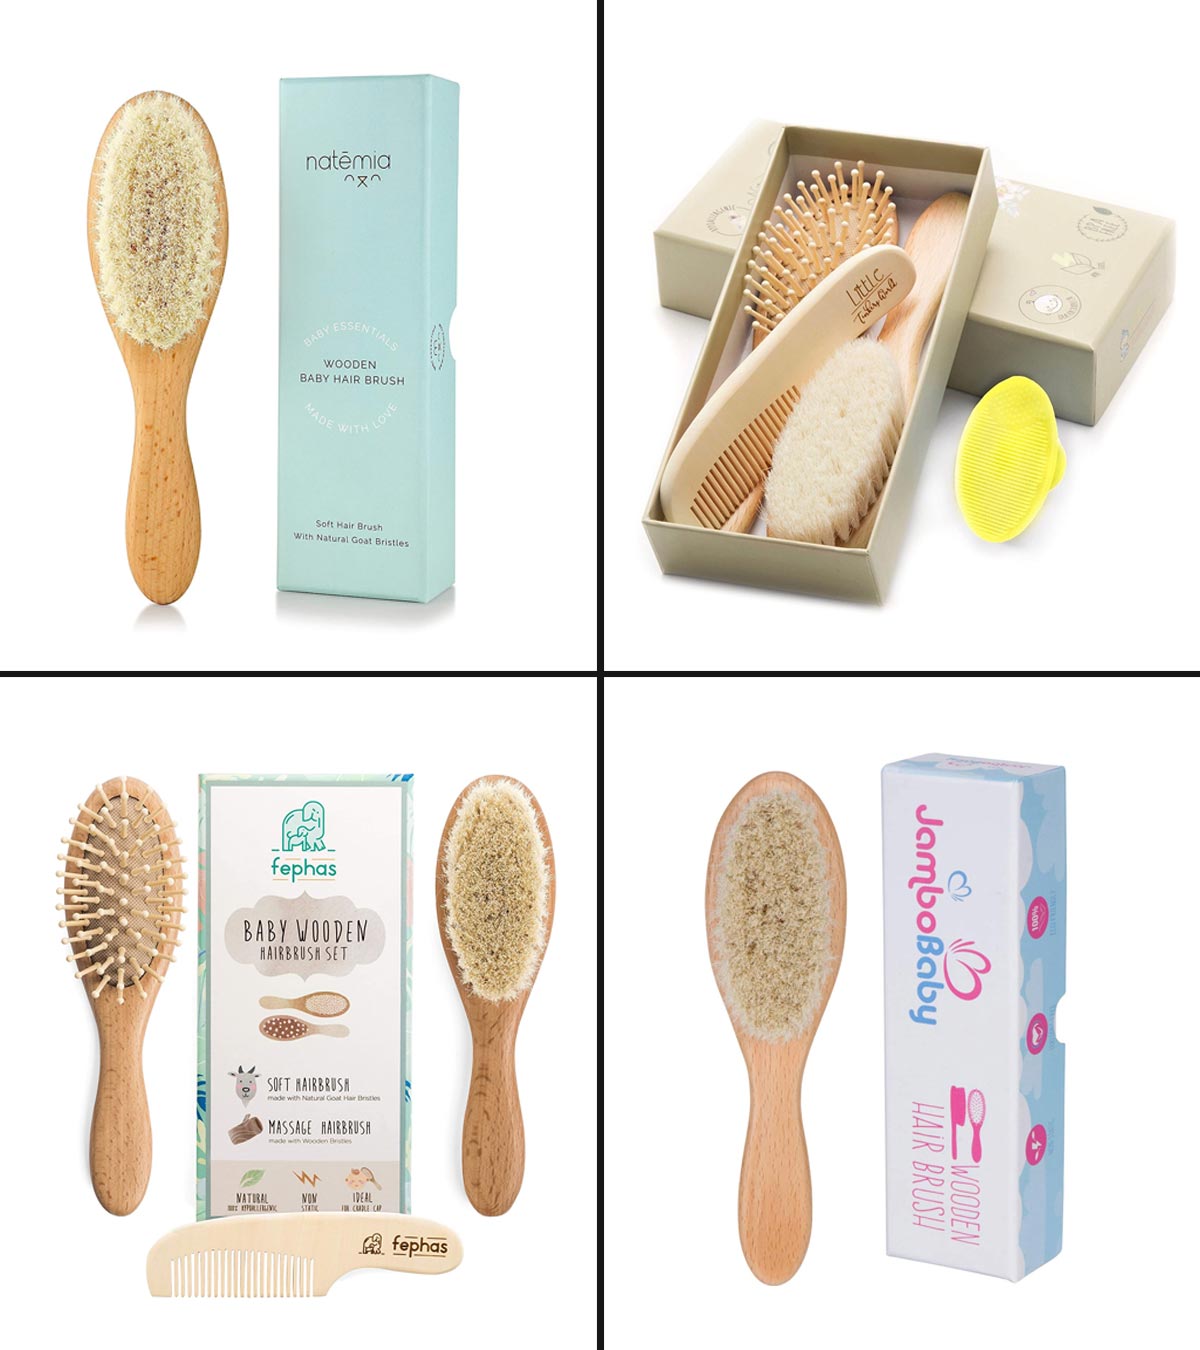 3pcs Hair Brush Cleaners Hair Brush Cleaning Tool Comb Cleaning Tools